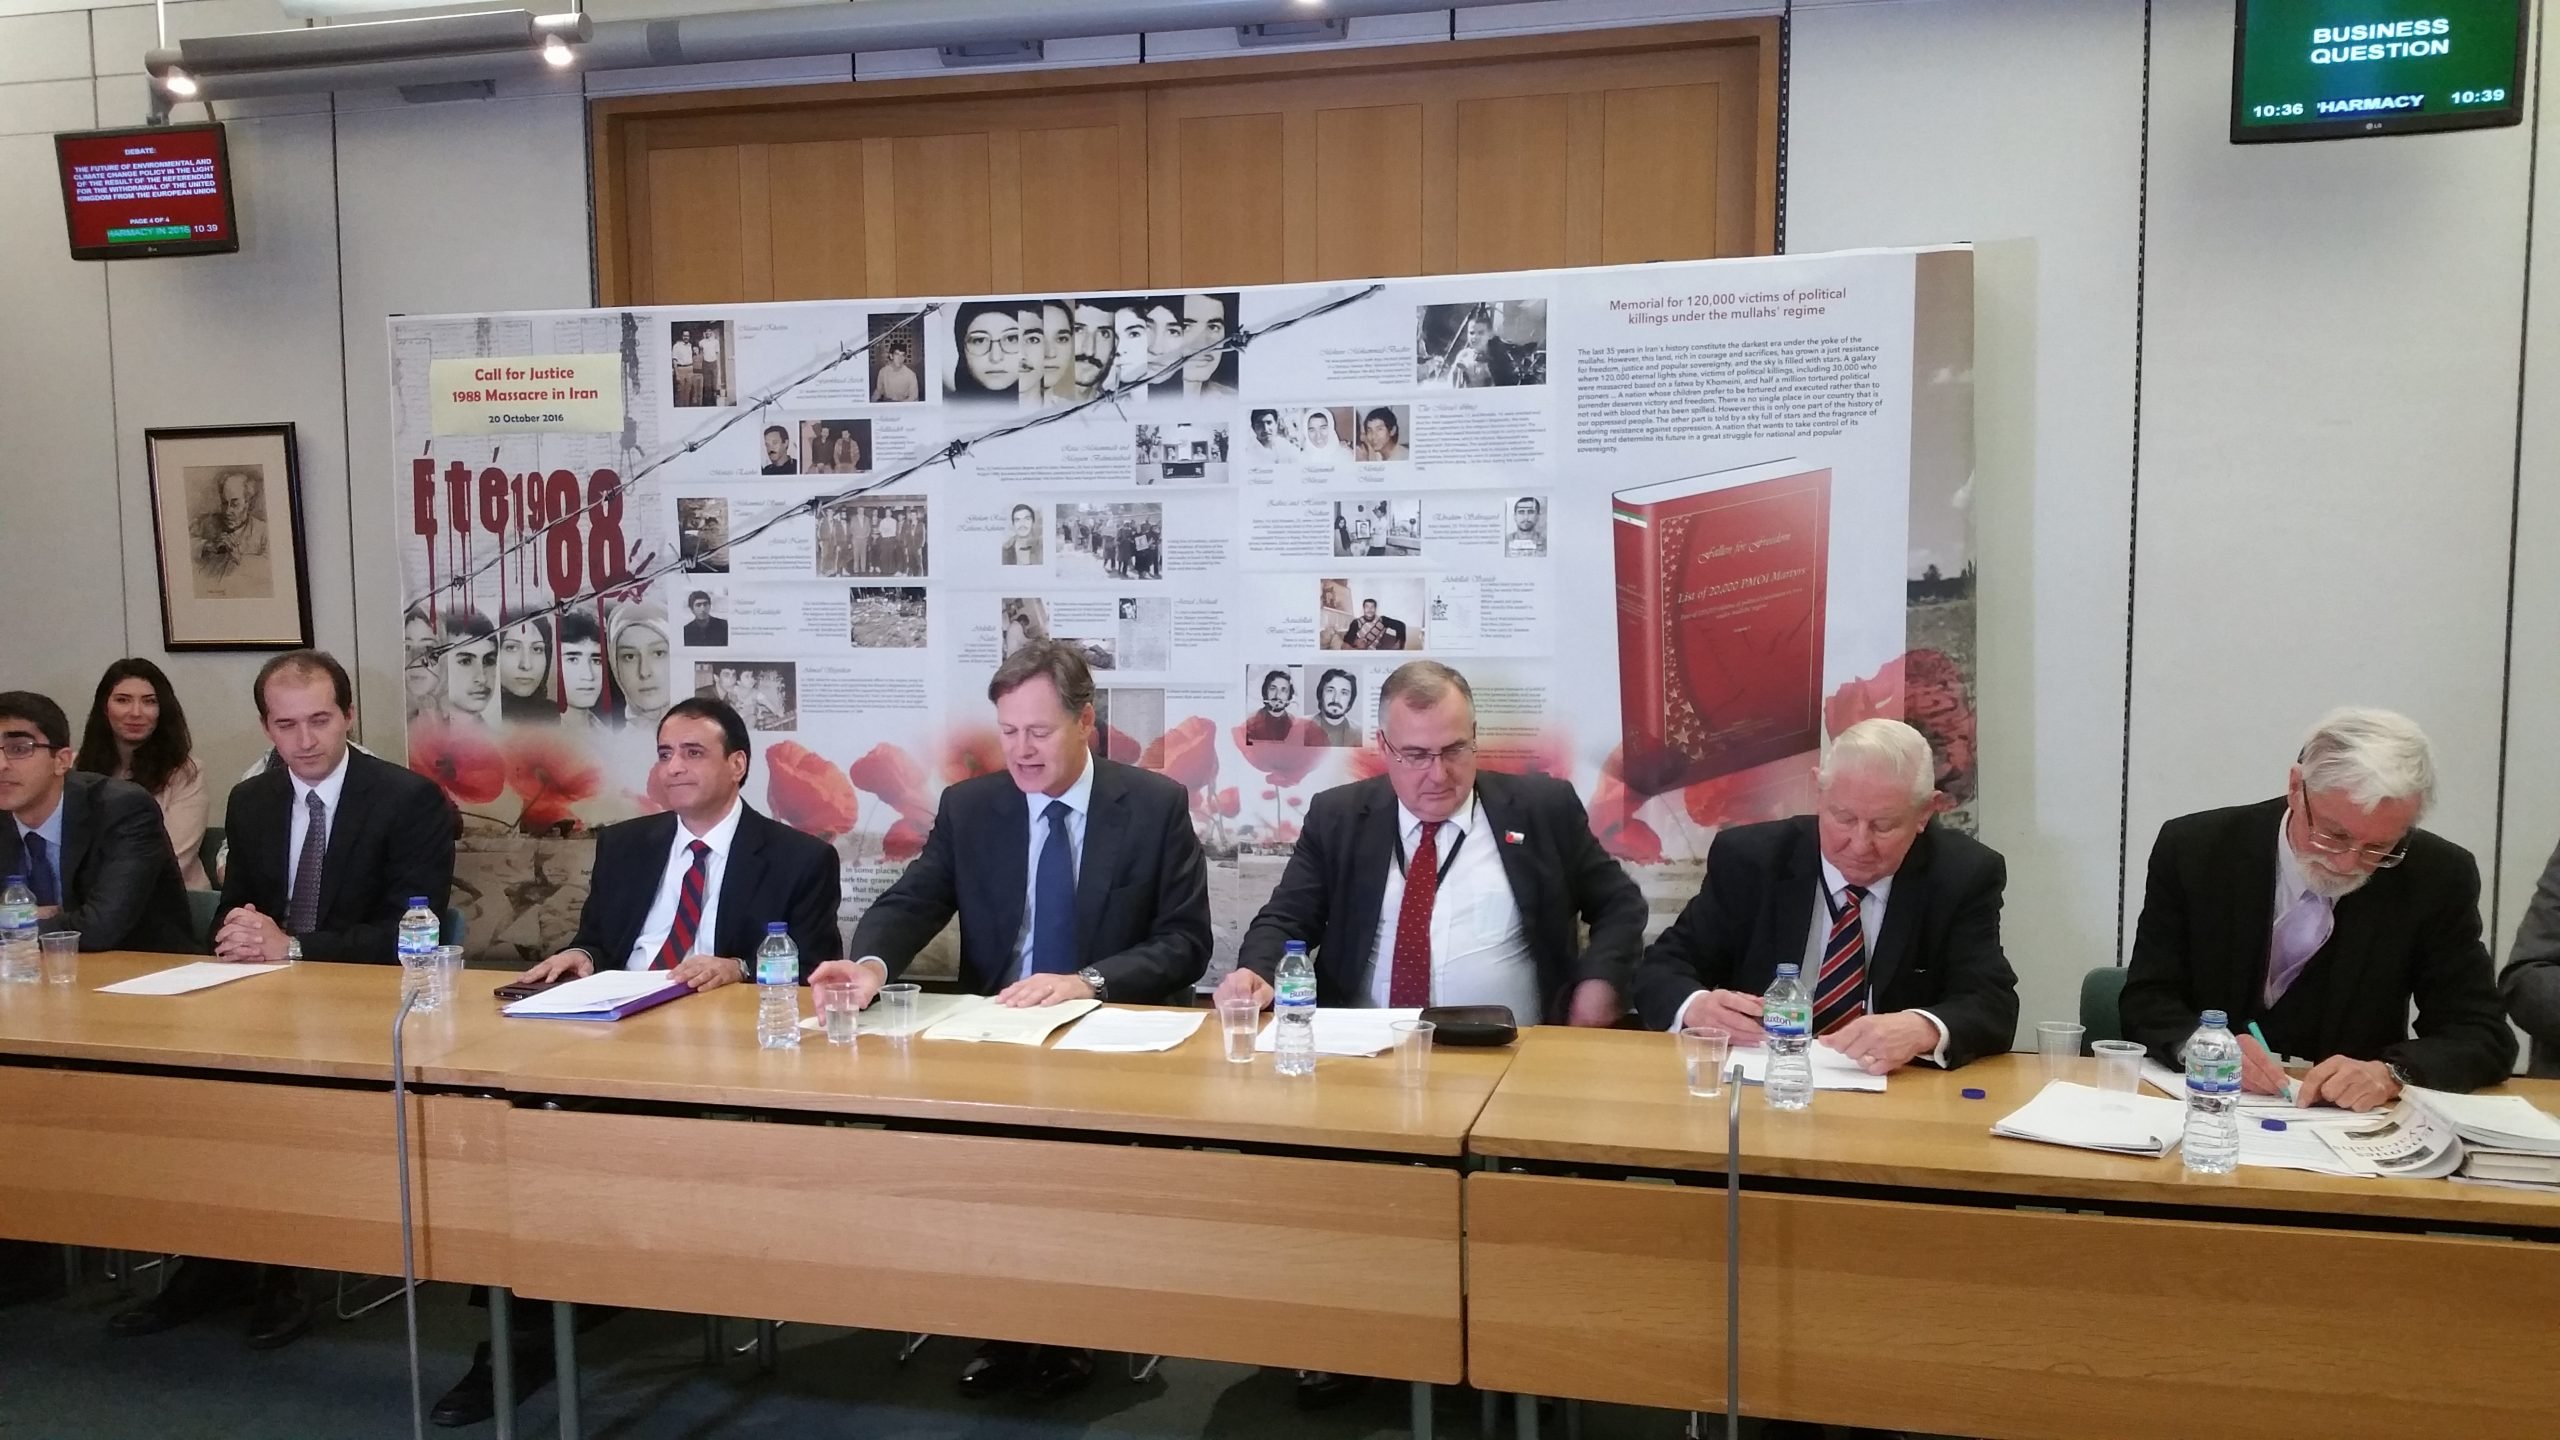 Dozens-of-cross-party-MPs-and-Peers-discussed-the-Iranian-regime’s-systematic-human-rights-abuses-and-its-alarming-use-of-death-penalty-at-a-conference-in-Parliament-on-17-October-2019.-scaled